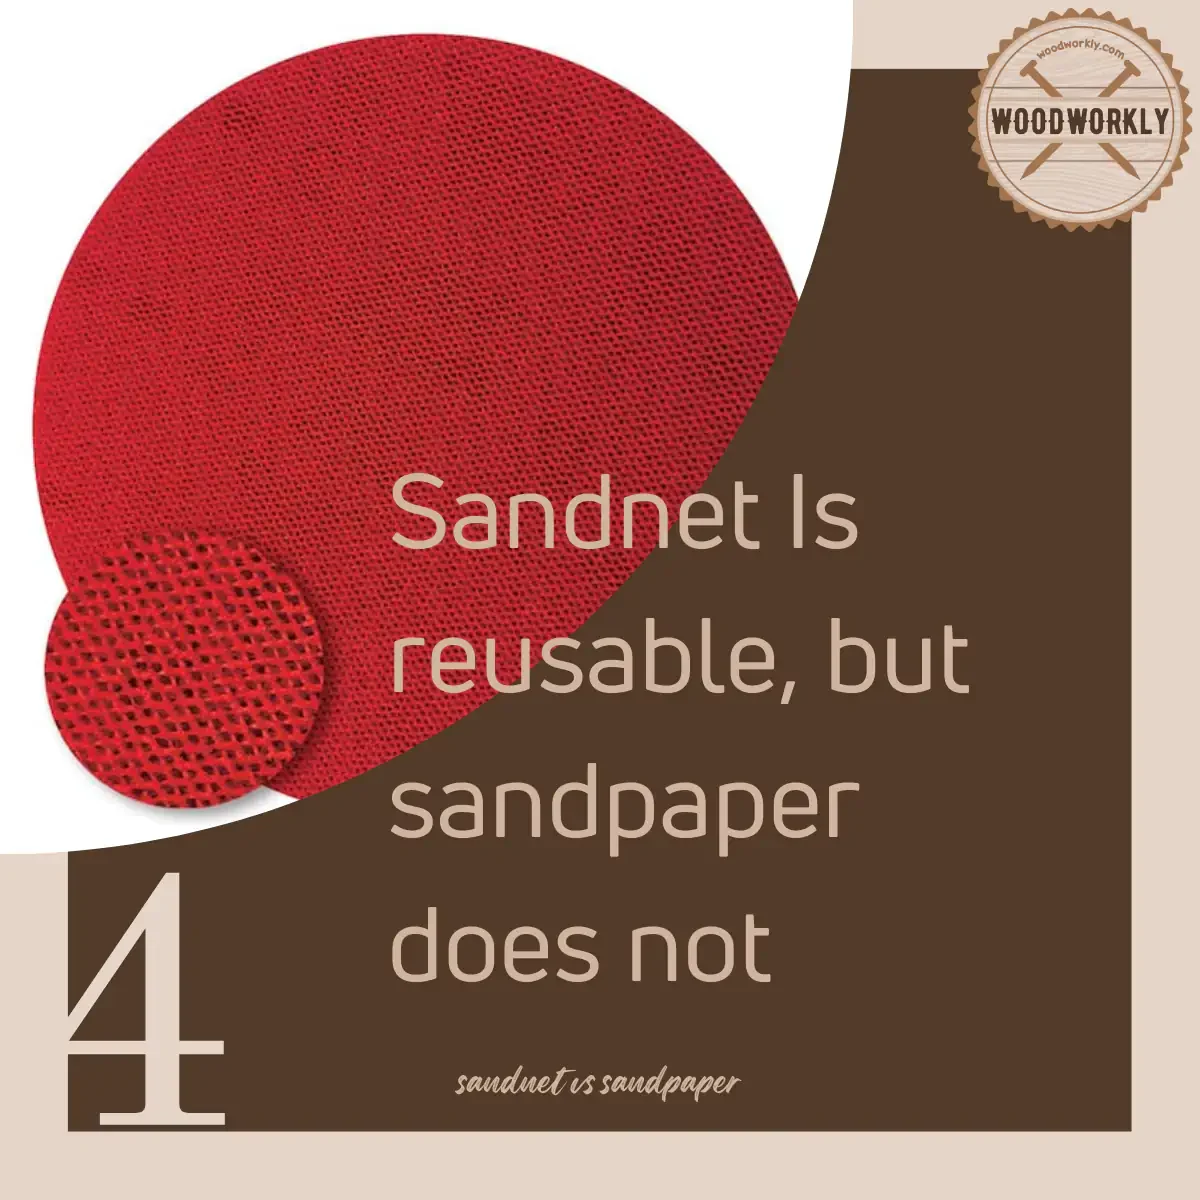 Sandnet Is Reusable And Sandpaper Is Not